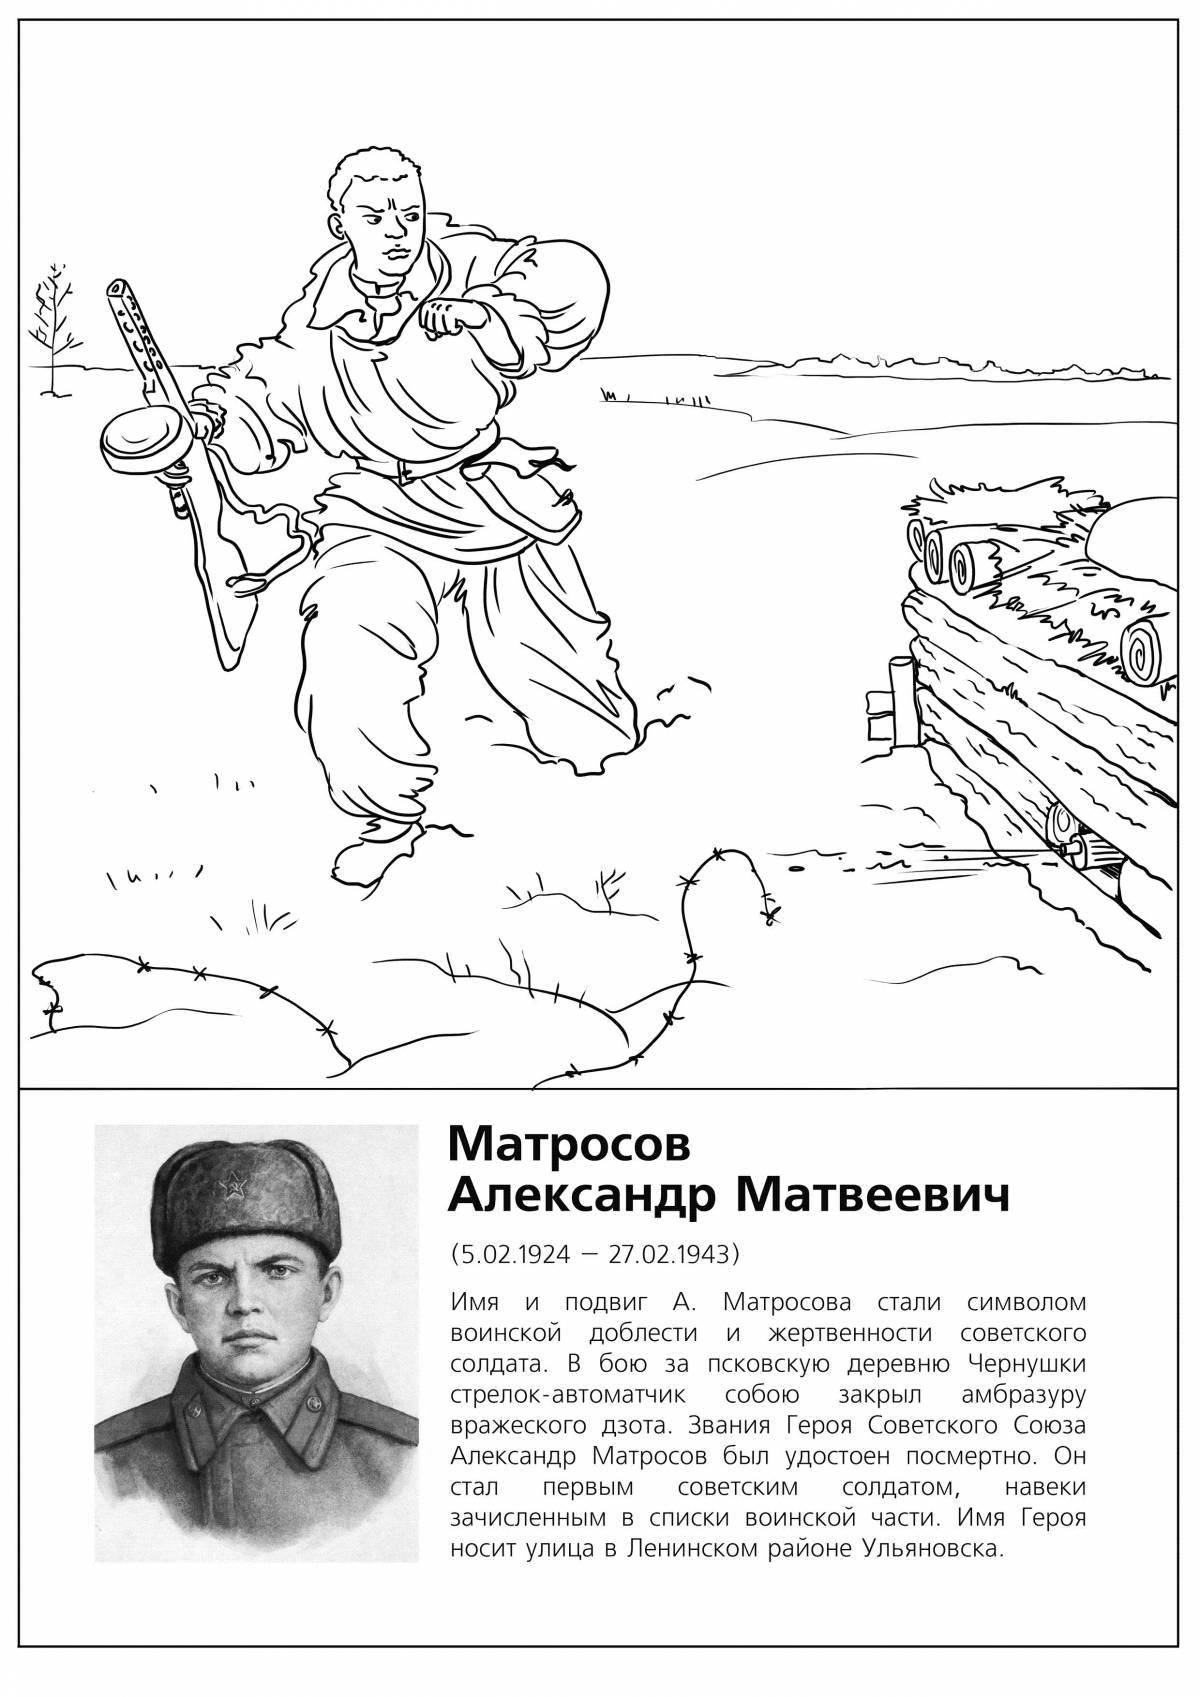 Glamorous war heroes coloring page